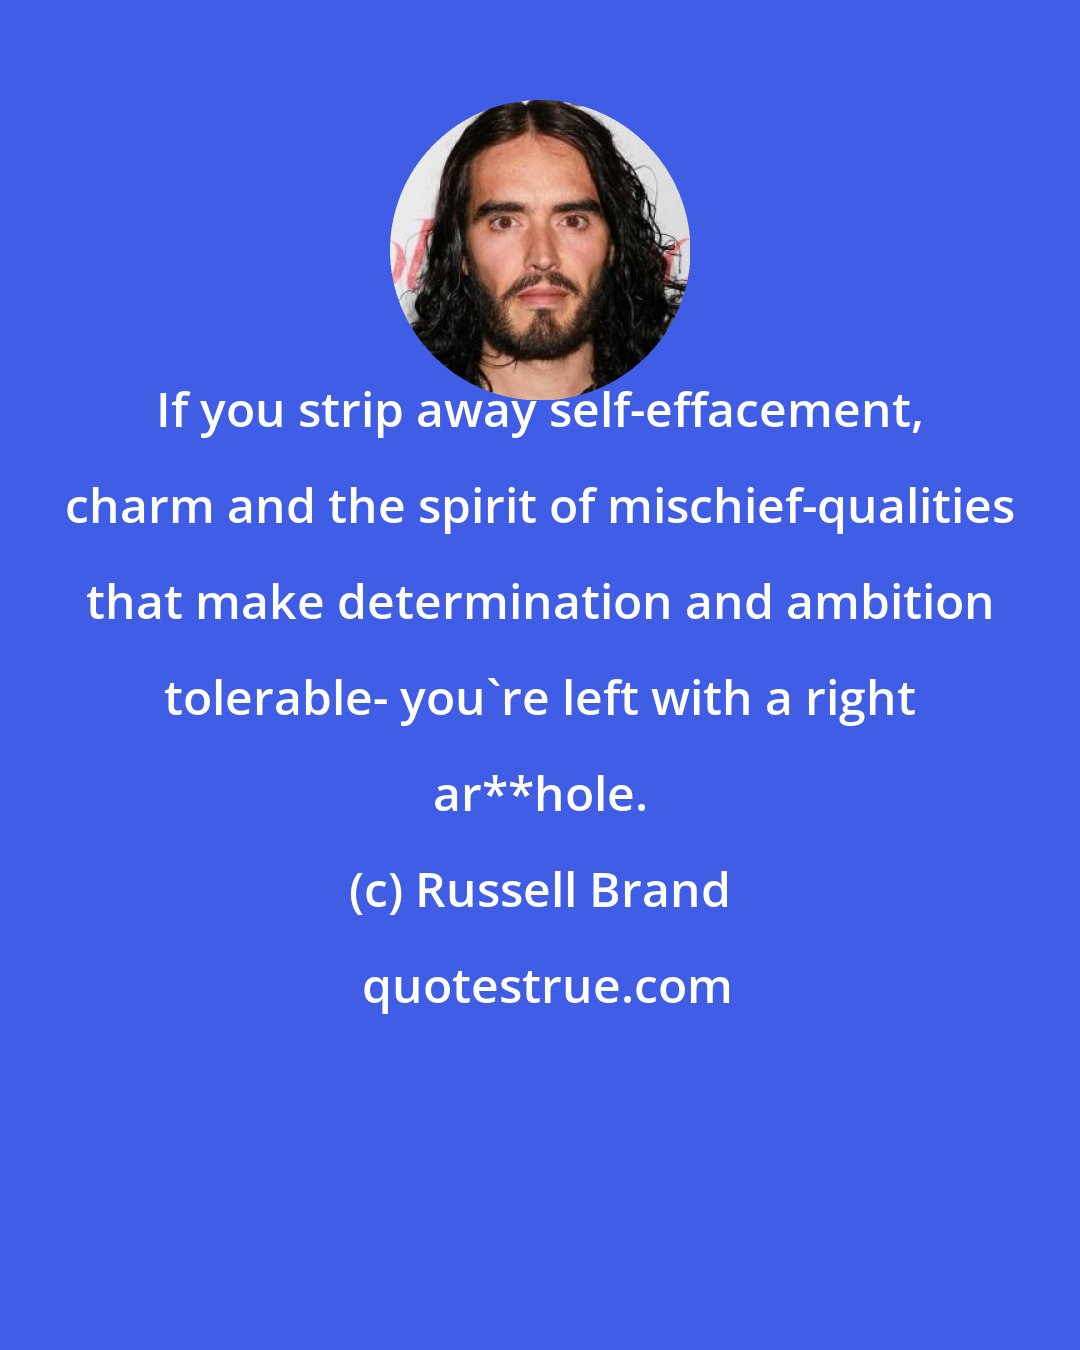 Russell Brand: If you strip away self-effacement, charm and the spirit of mischief-qualities that make determination and ambition tolerable- you're left with a right ar**hole.